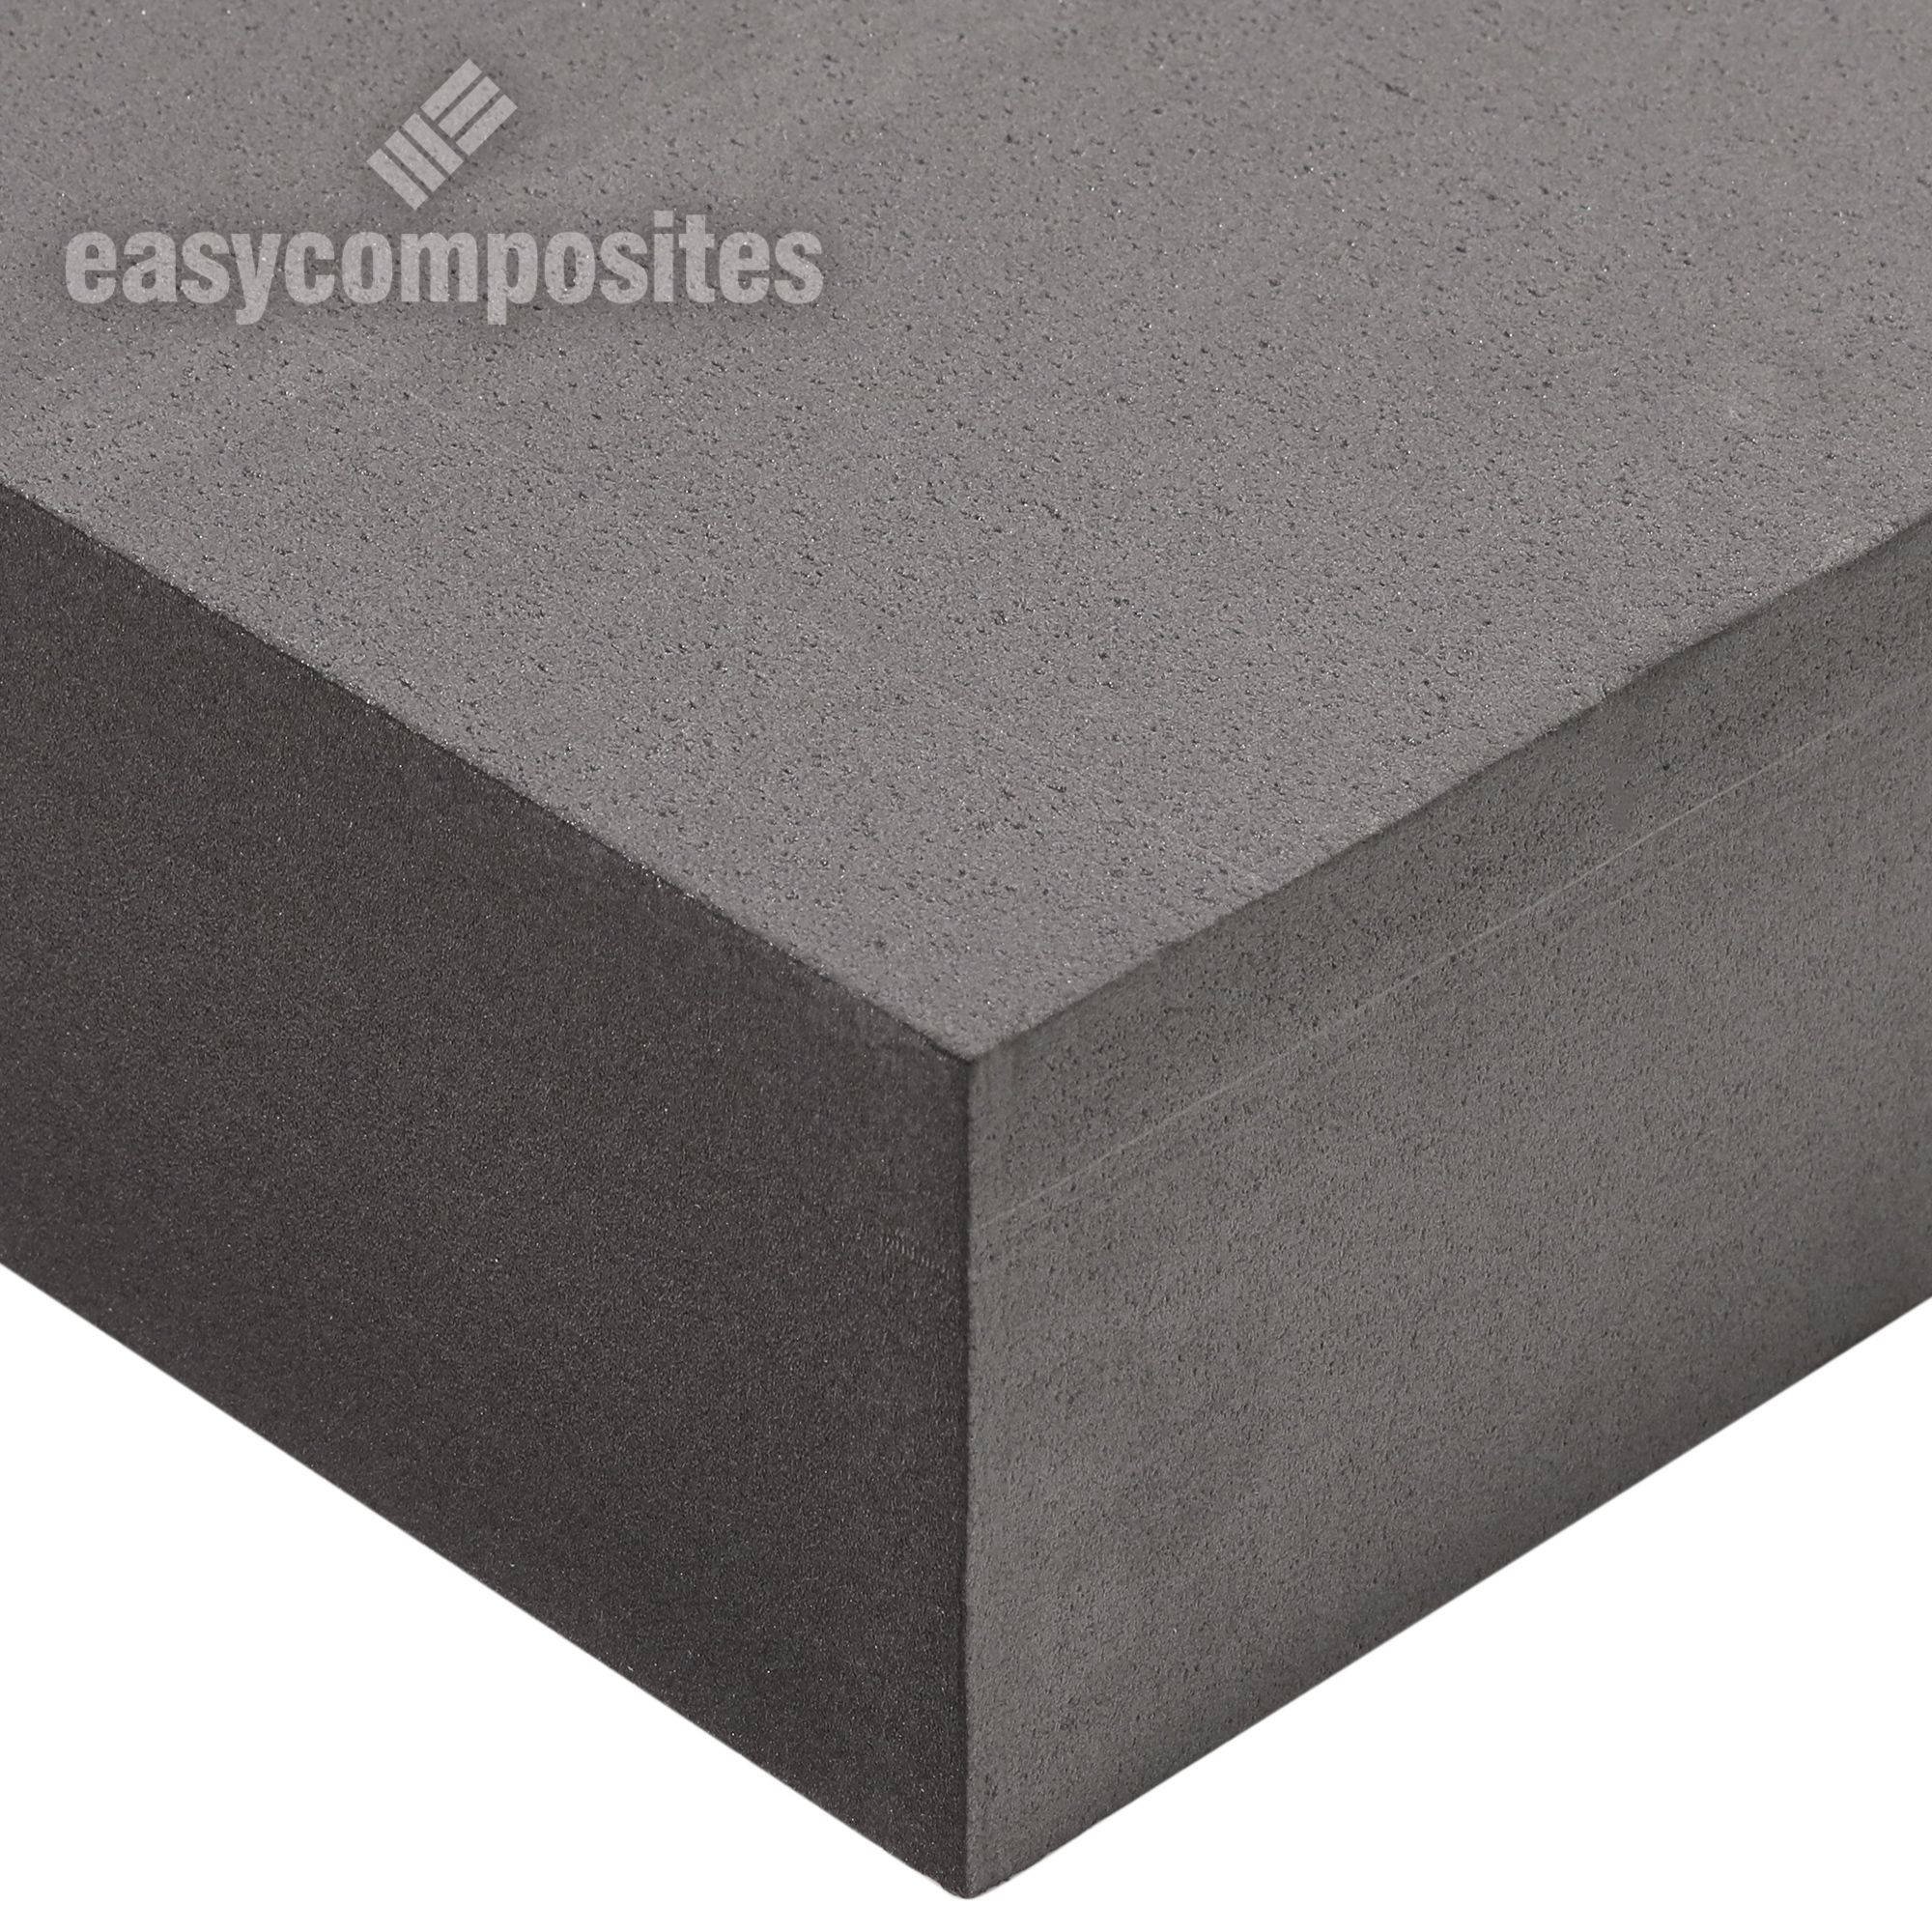 High Density Sound Absorption XPS Foam Panel Extruded Polystyrene